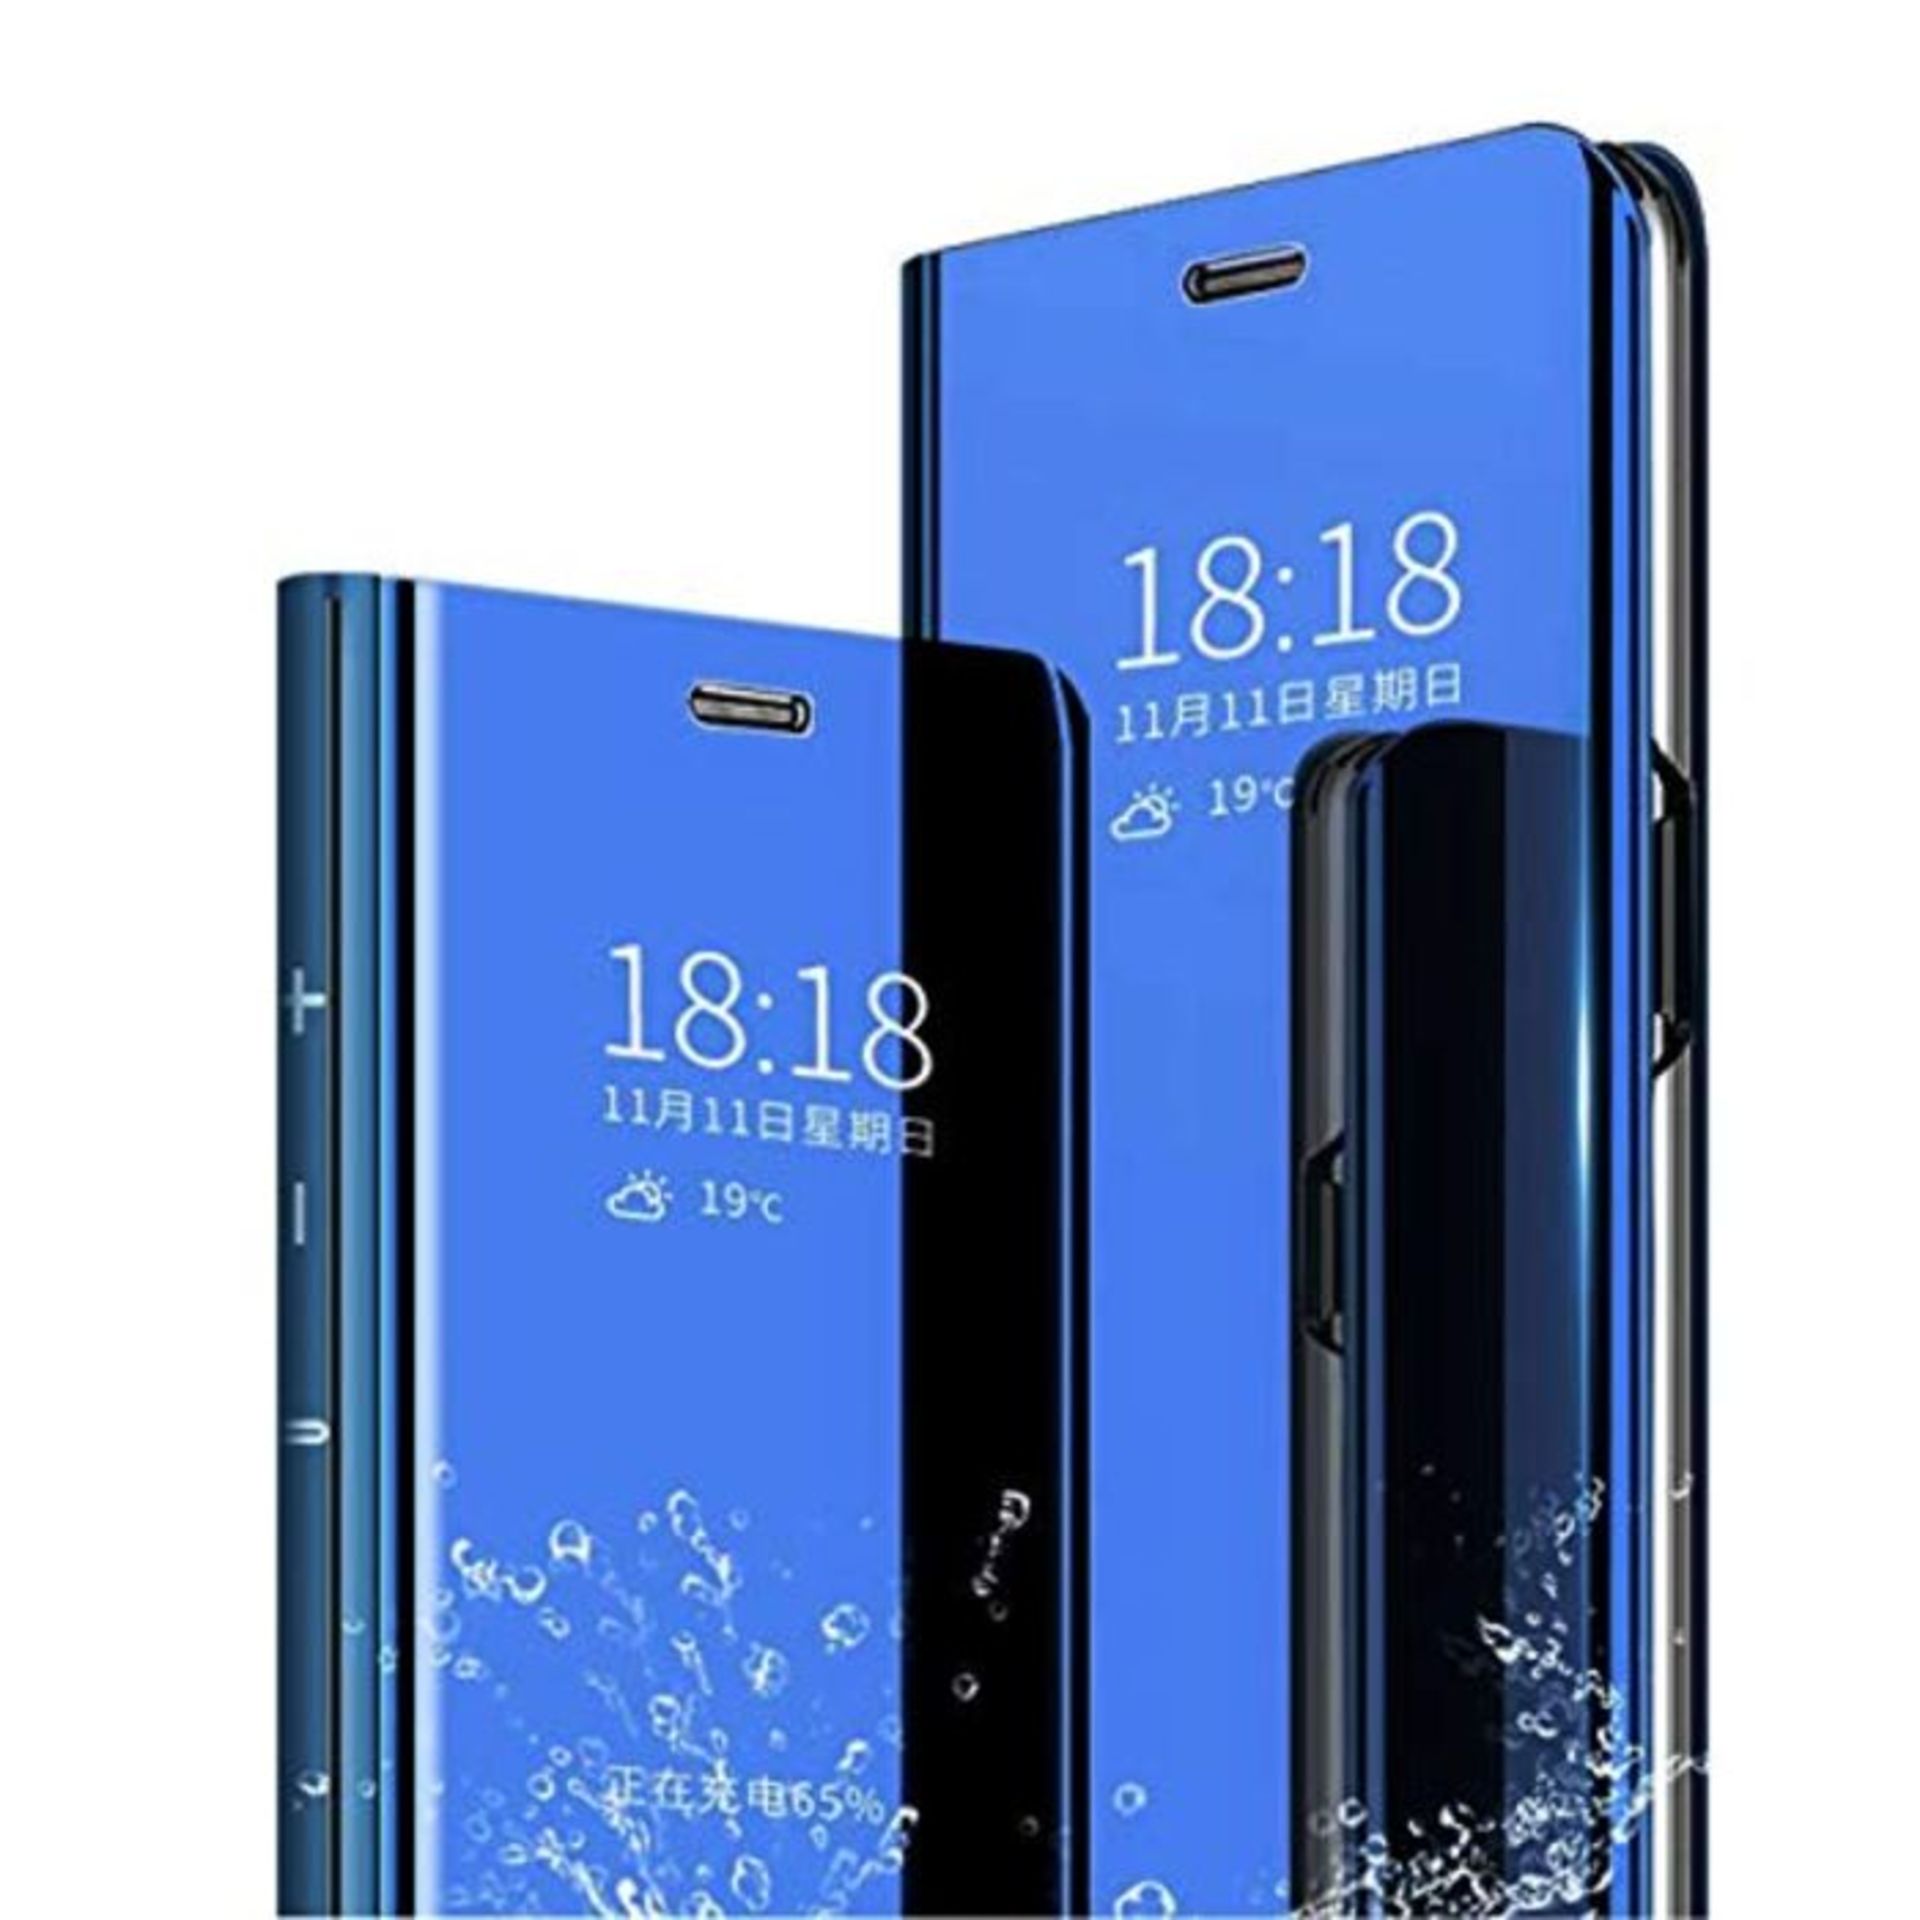 MLOTECH Case for Huawei P20 PRO cover + tempered glass Flip Clear View Translucent Sta